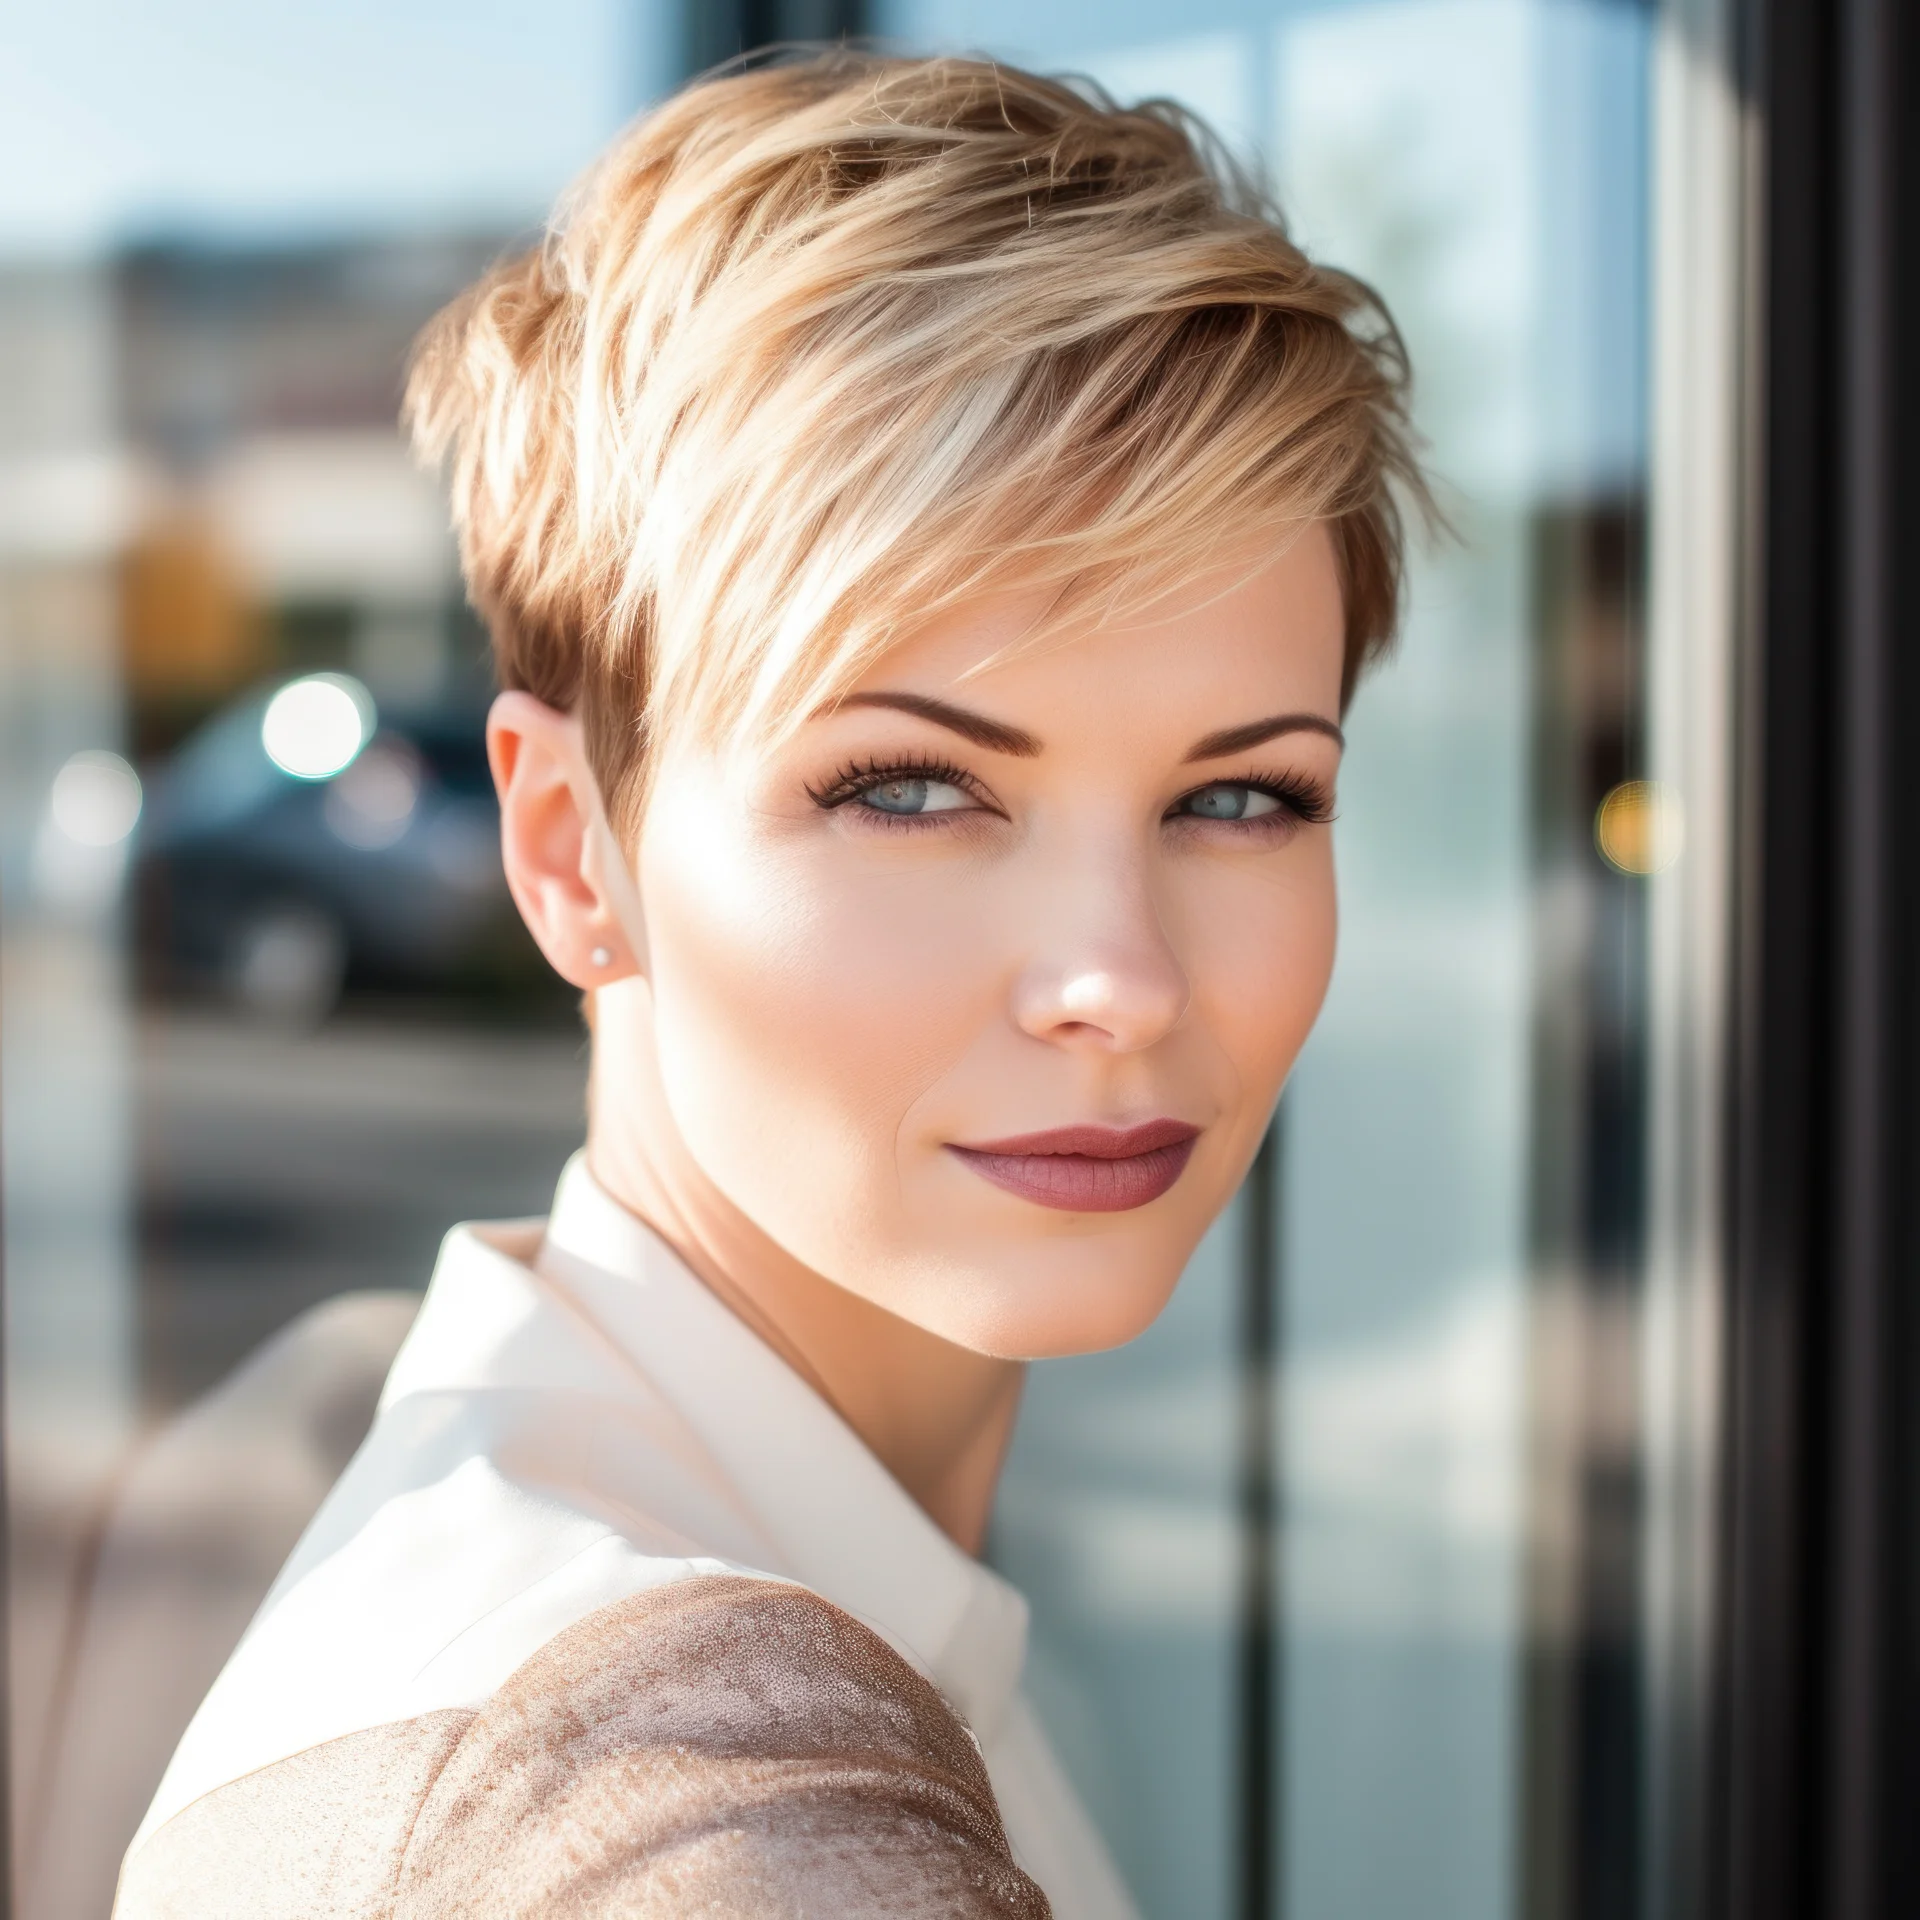 Pixie Cut Hairstyles For Women -3